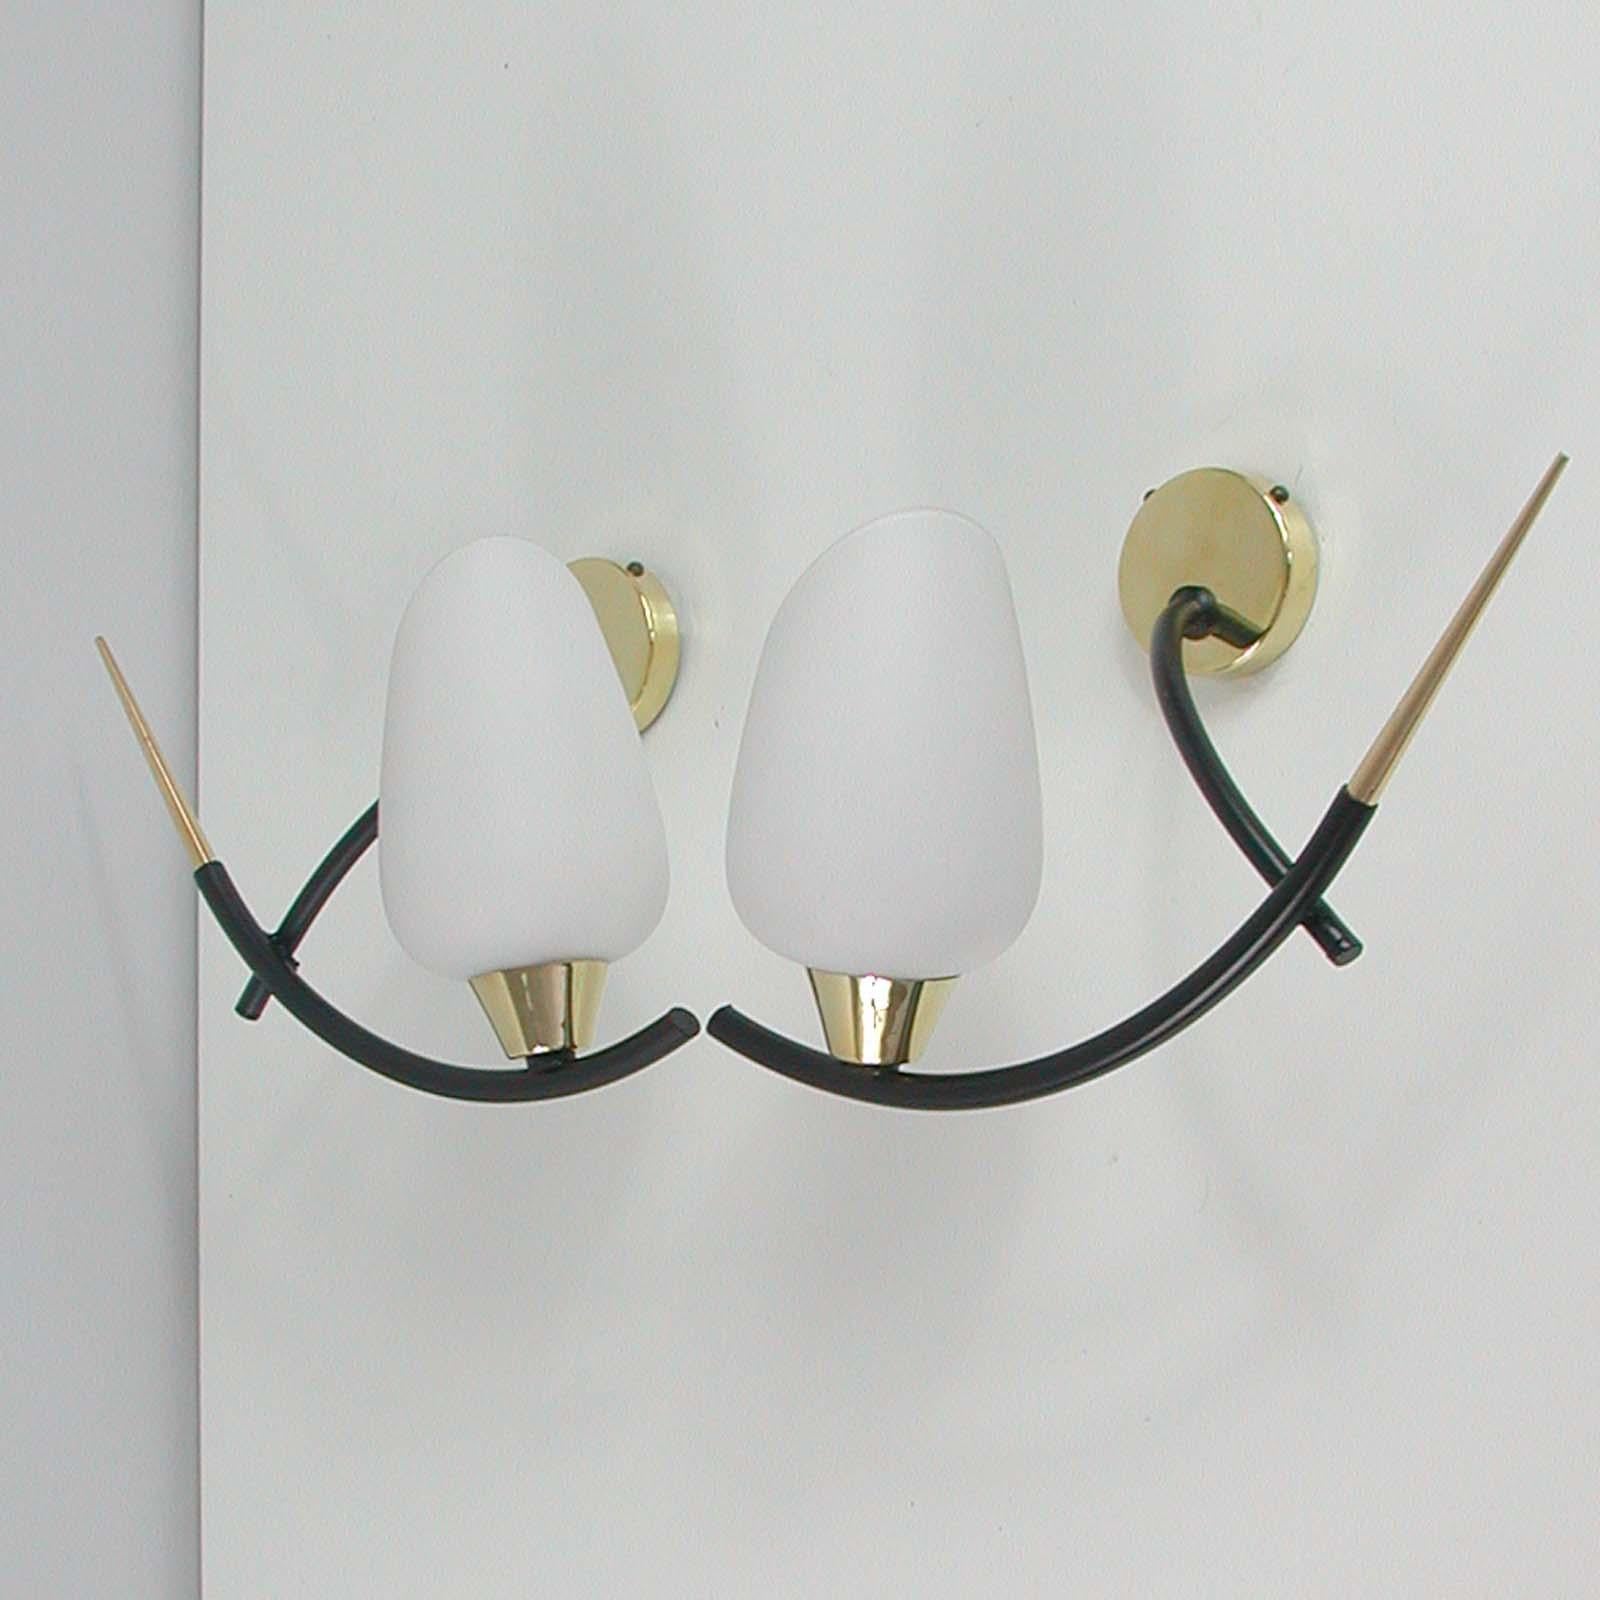 Midcentury French Brass & Opaline Glass Sconces by Maison Arlus, 1950s For Sale 9